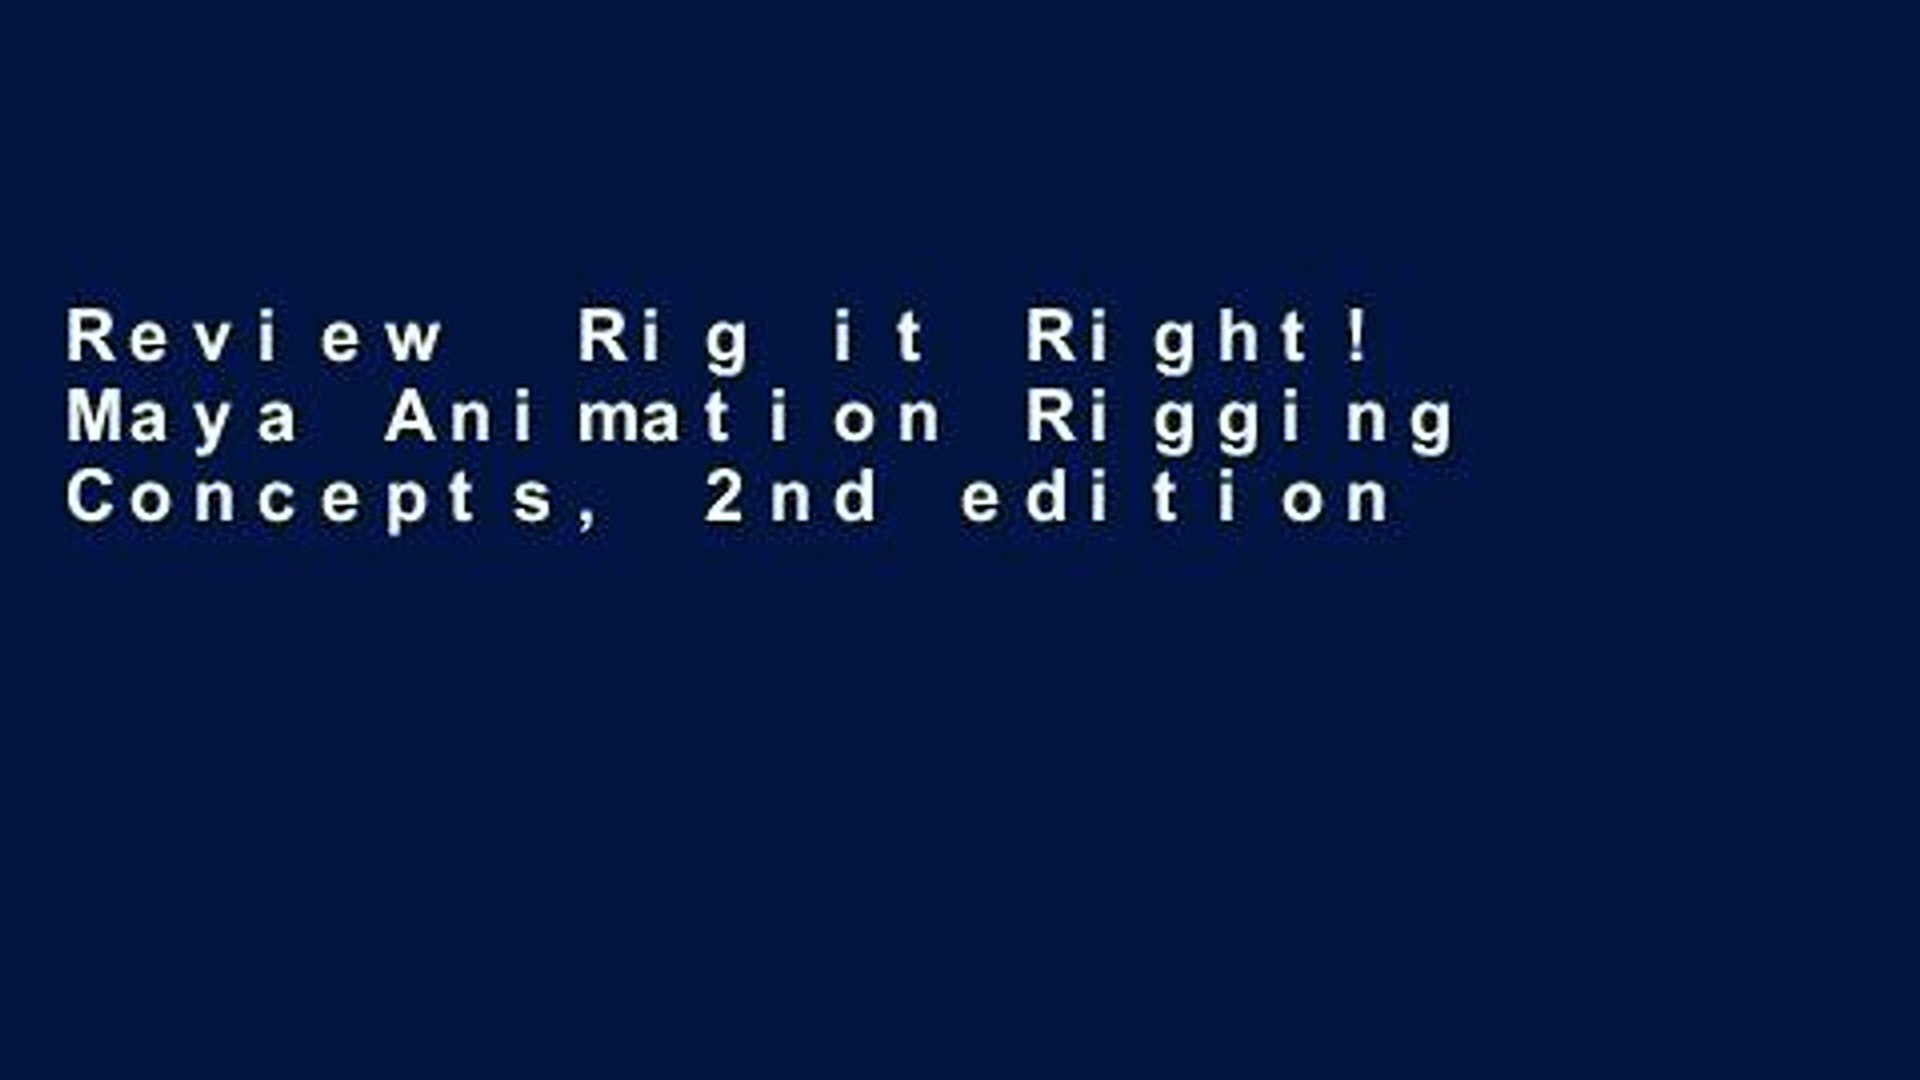 Review Rig it Right! Maya Animation Rigging Concepts, 2nd edition - Video  Dailymotion